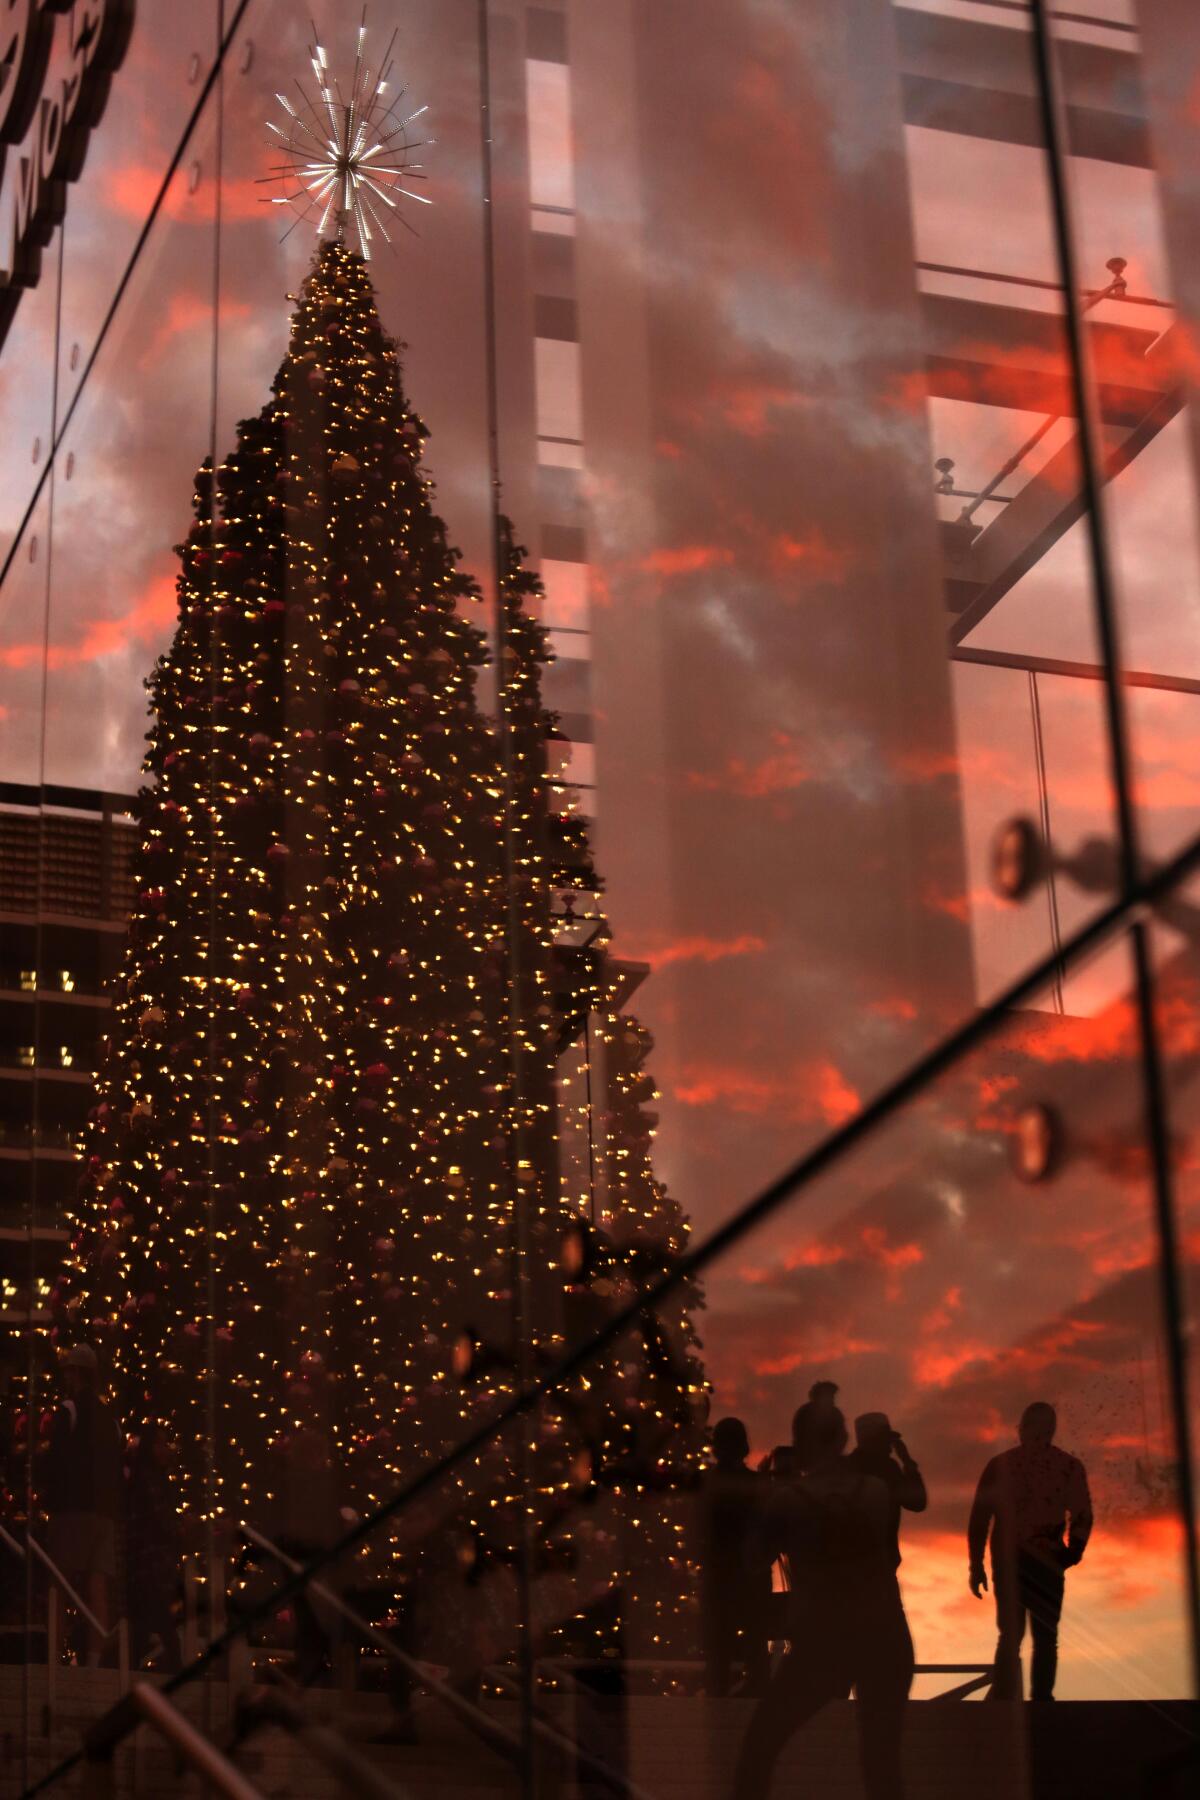 A Christmas tree and a sunset are reflected in a glass facade